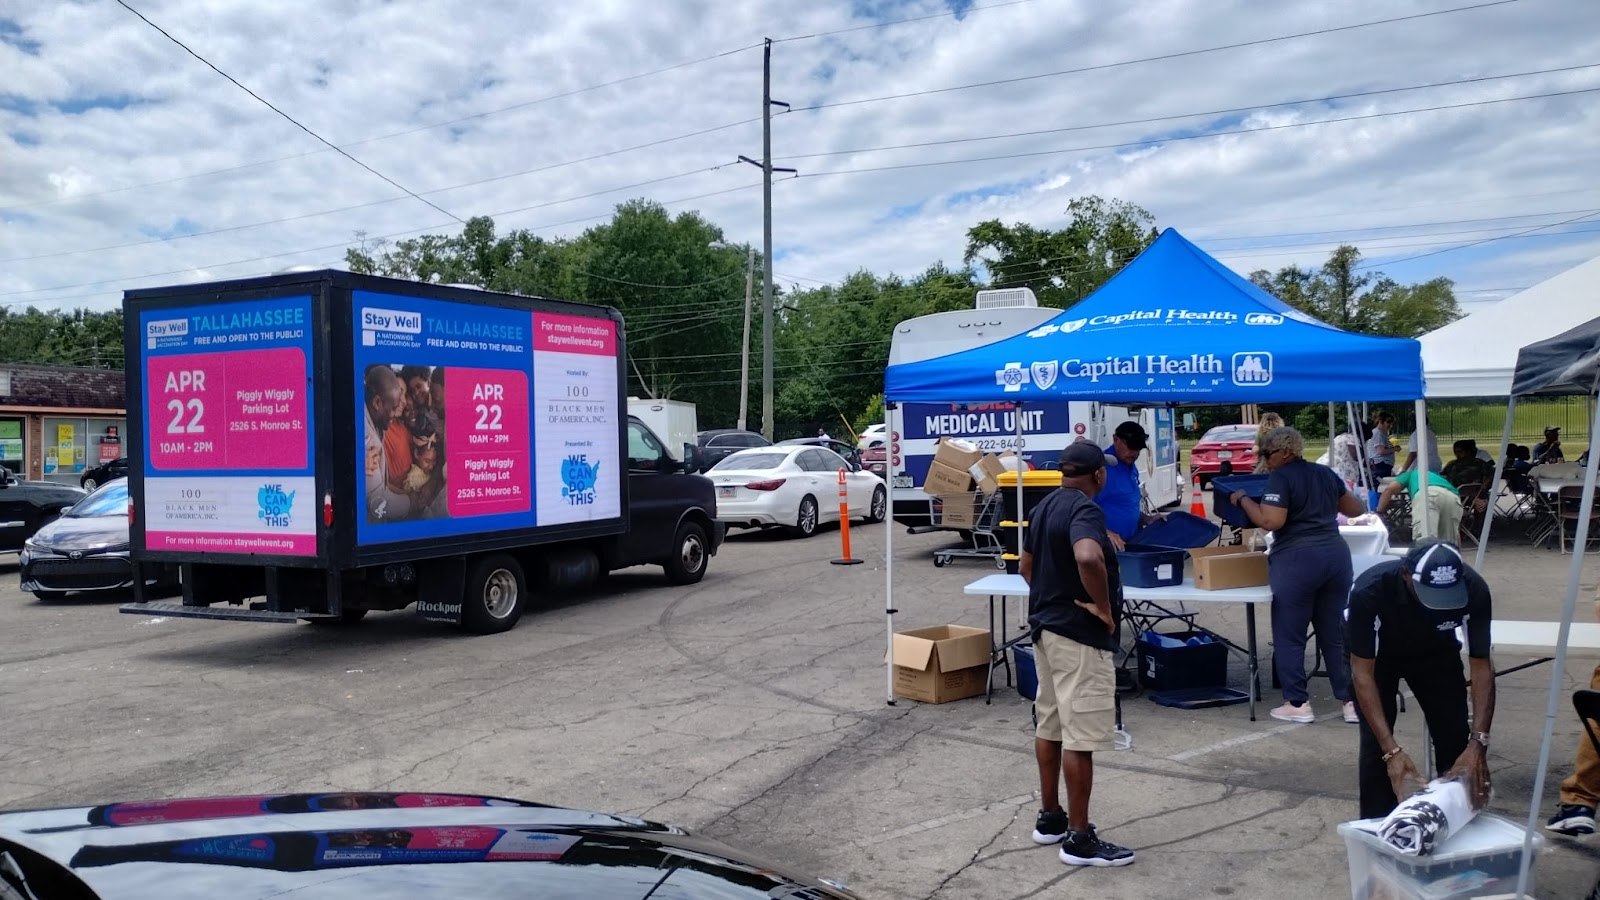 Digital billboard truck parked near a blue outdoor tent where Capital Health is having an outdoor clinic. People working around the tent